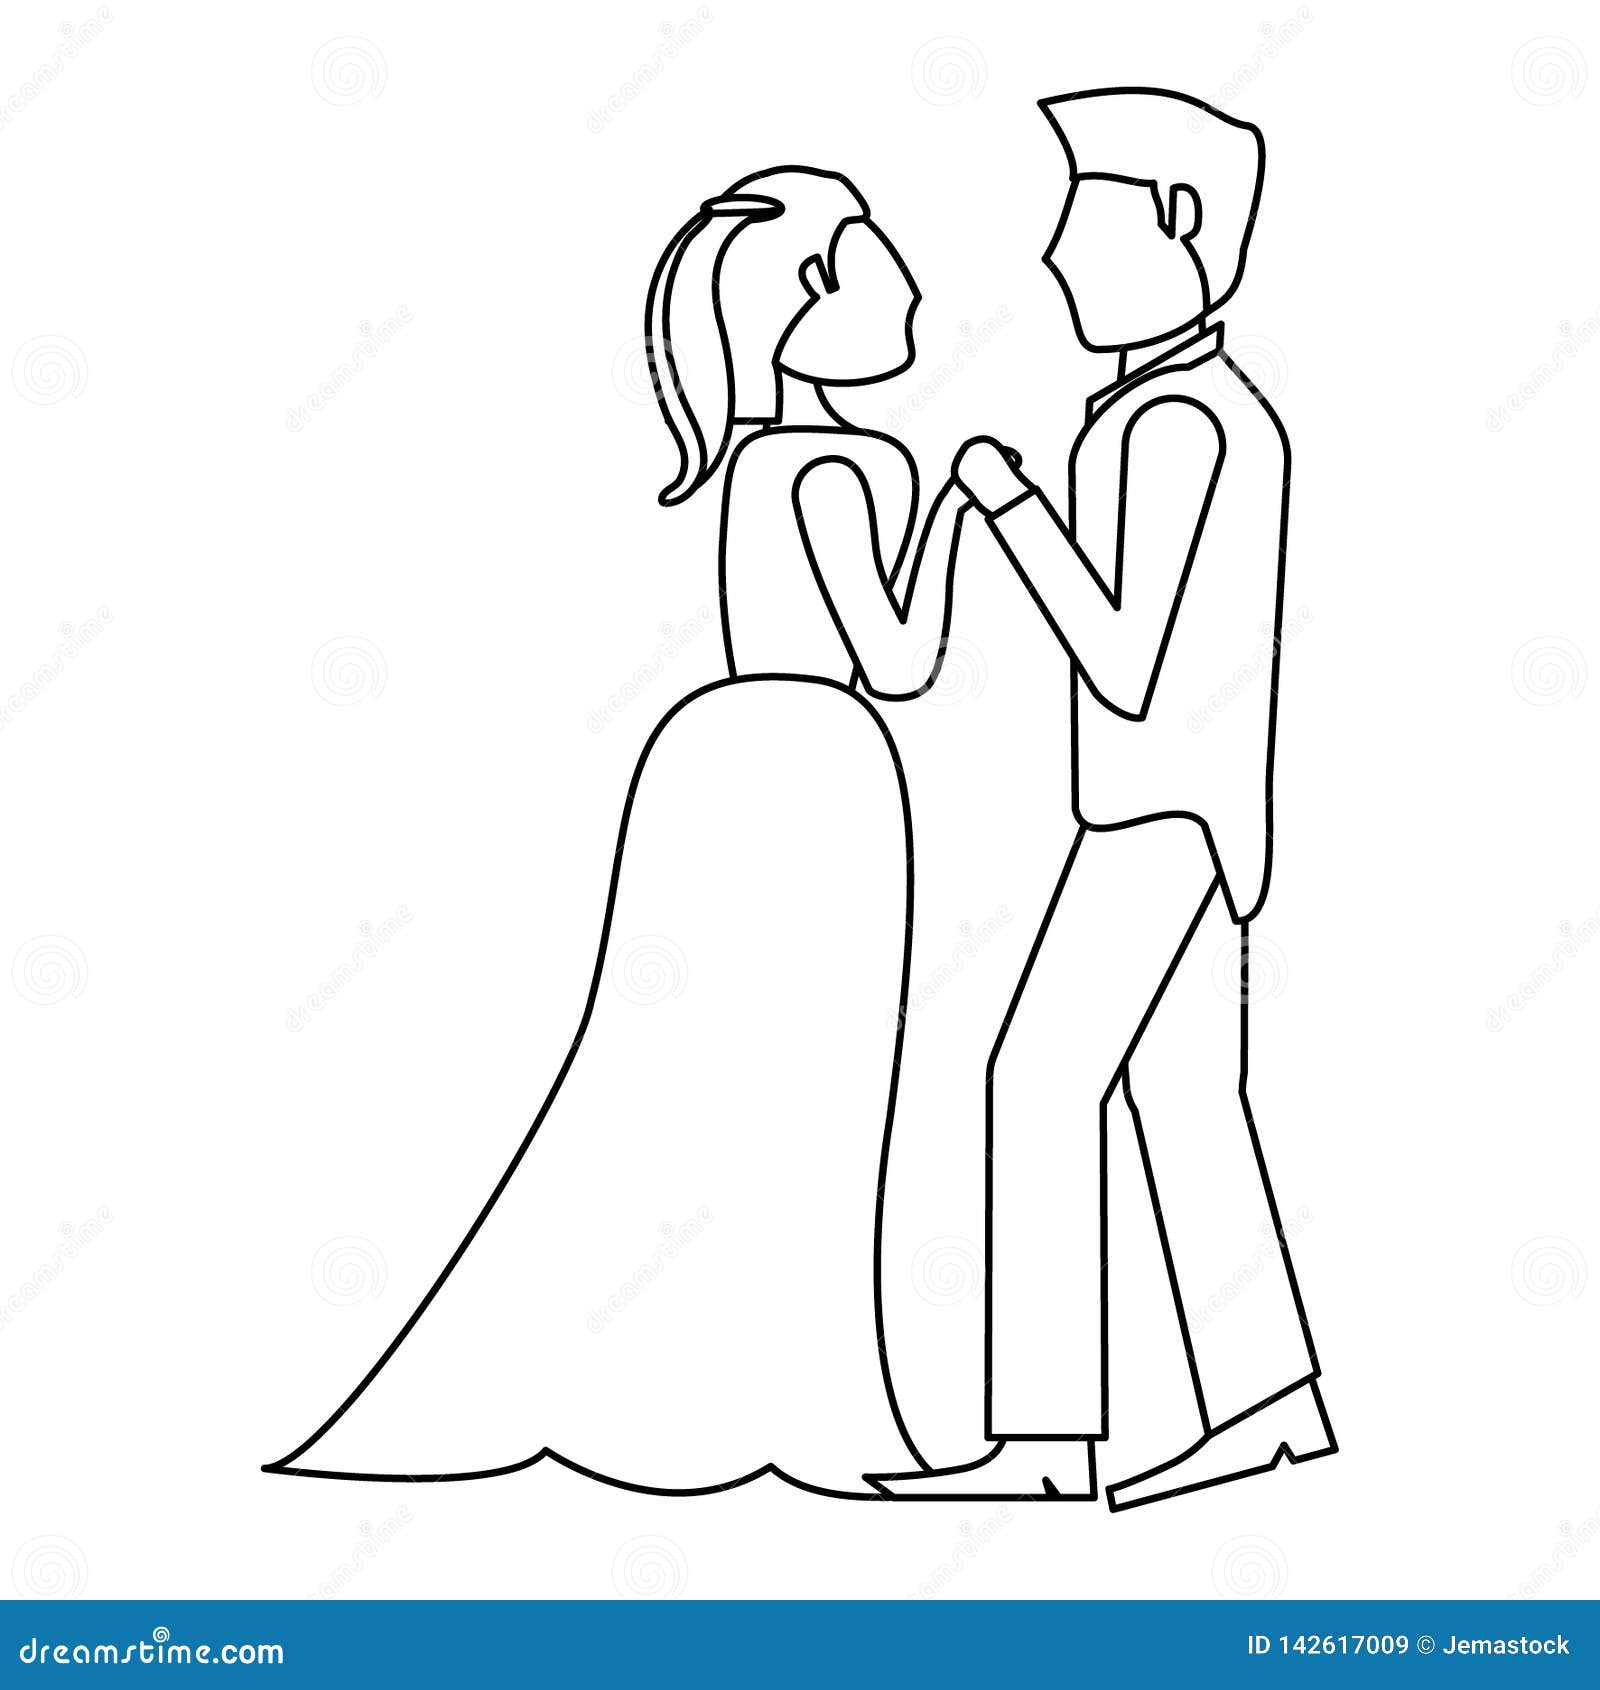 Wedding Couple Dancing In Black And White Stock Vector - Illustration ...
